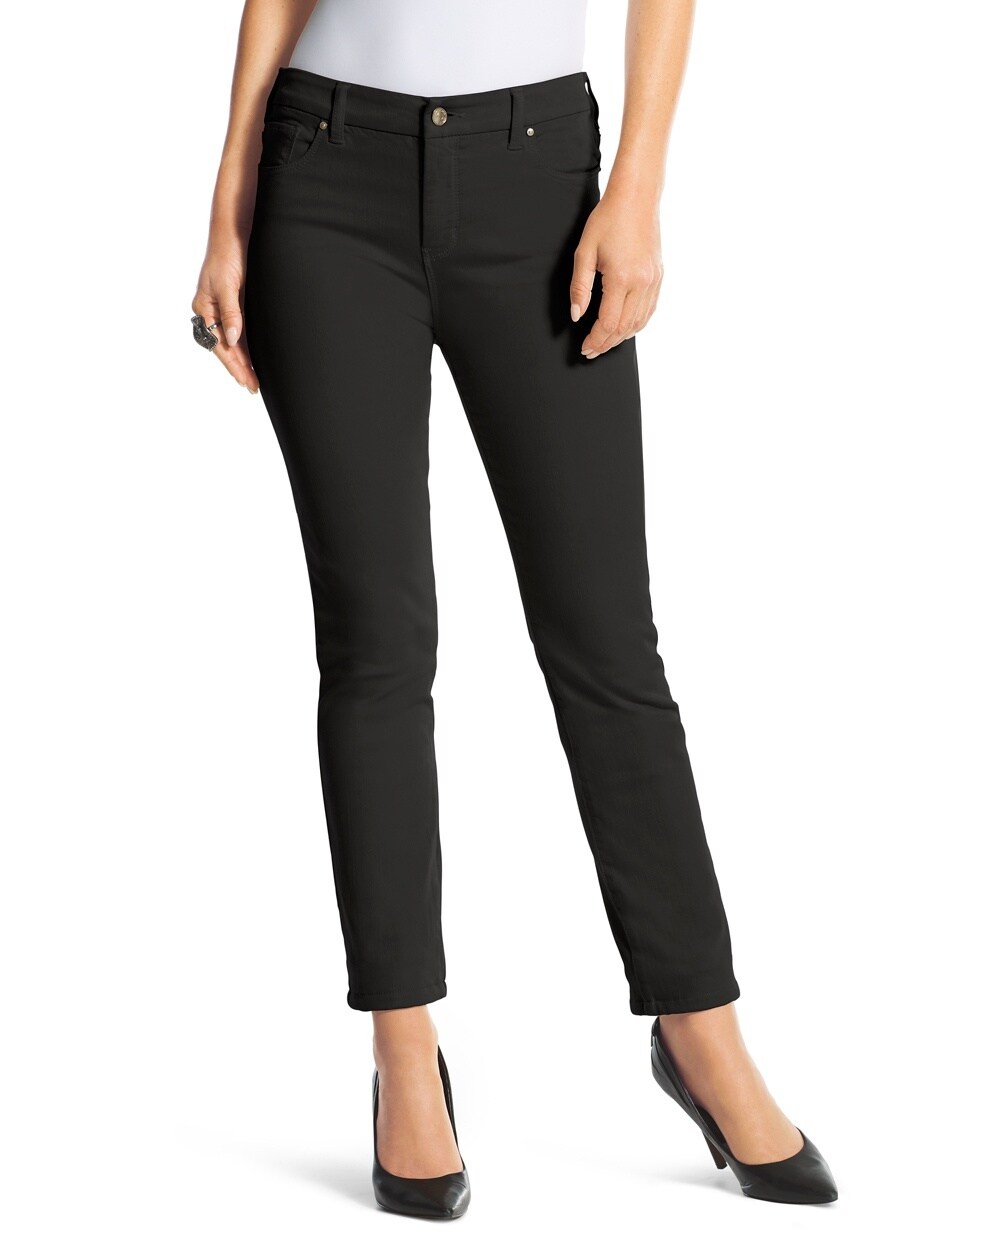 So Slimming Girlfriend Ankle Jeans in Black - Chico's